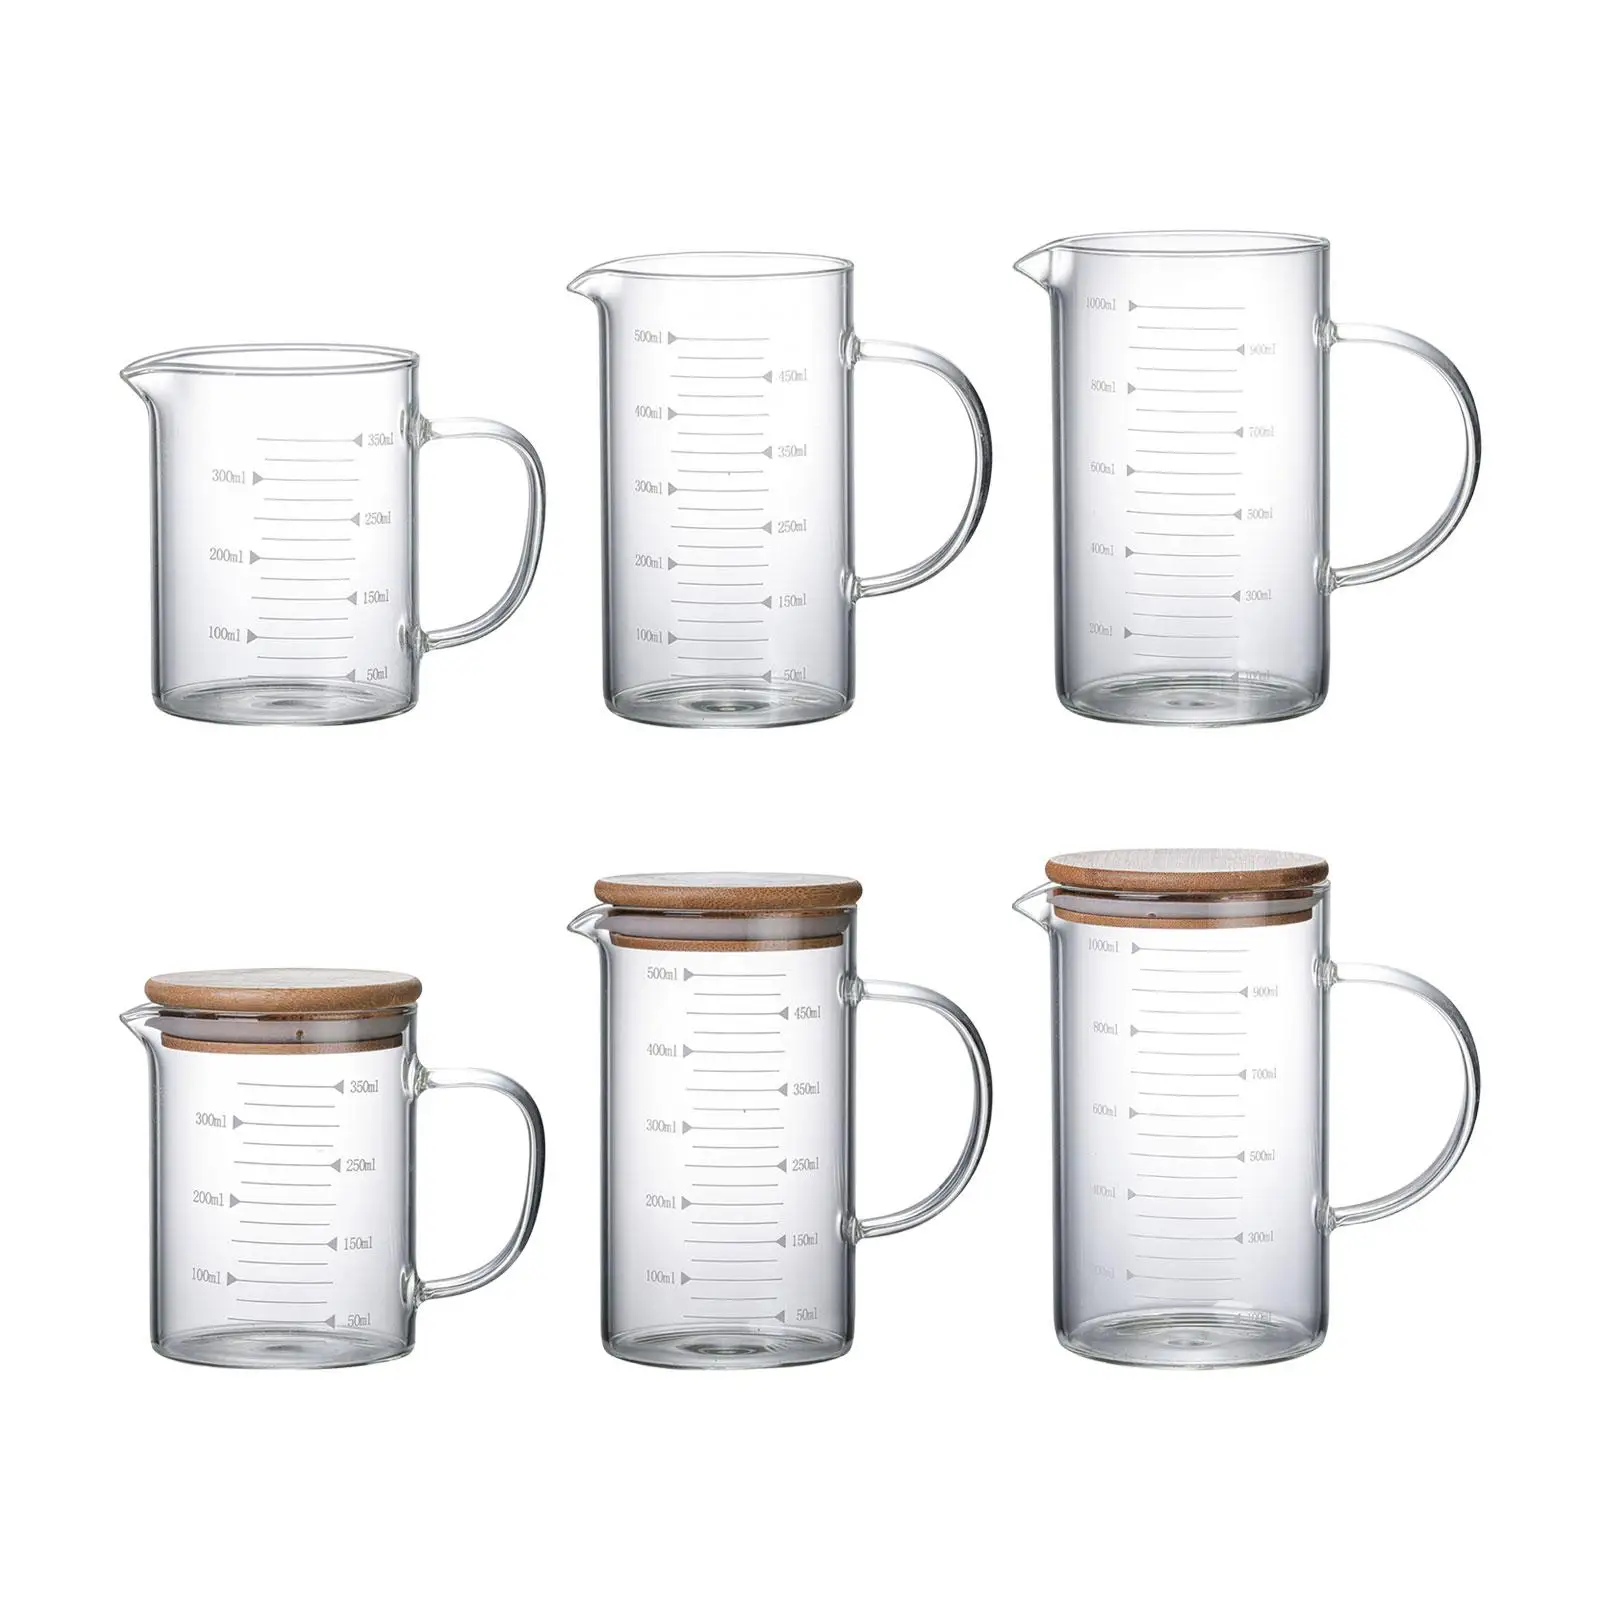 Water Pitcher with Scale Measure Jugs Containers with Scale Multipurpose Milk